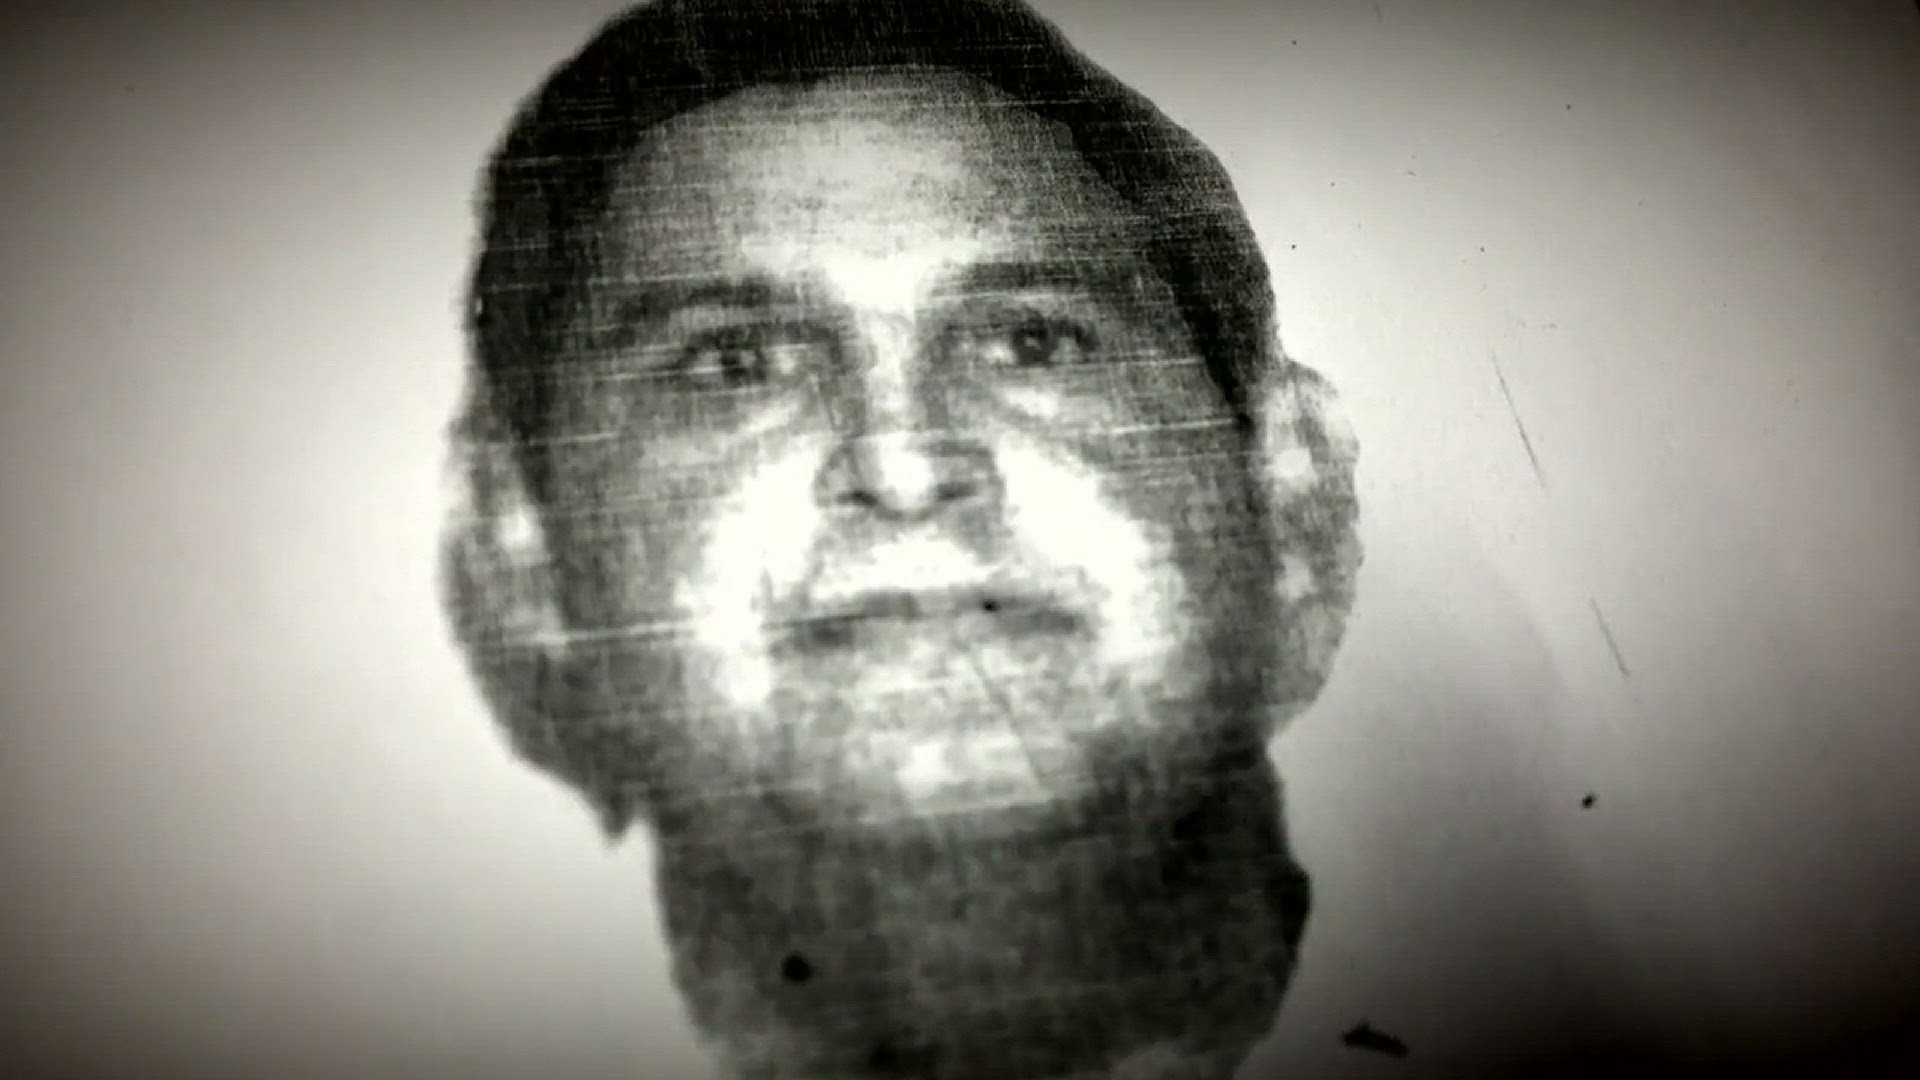 Arizona's Most Wanted: Hunt for Gilbert Montano